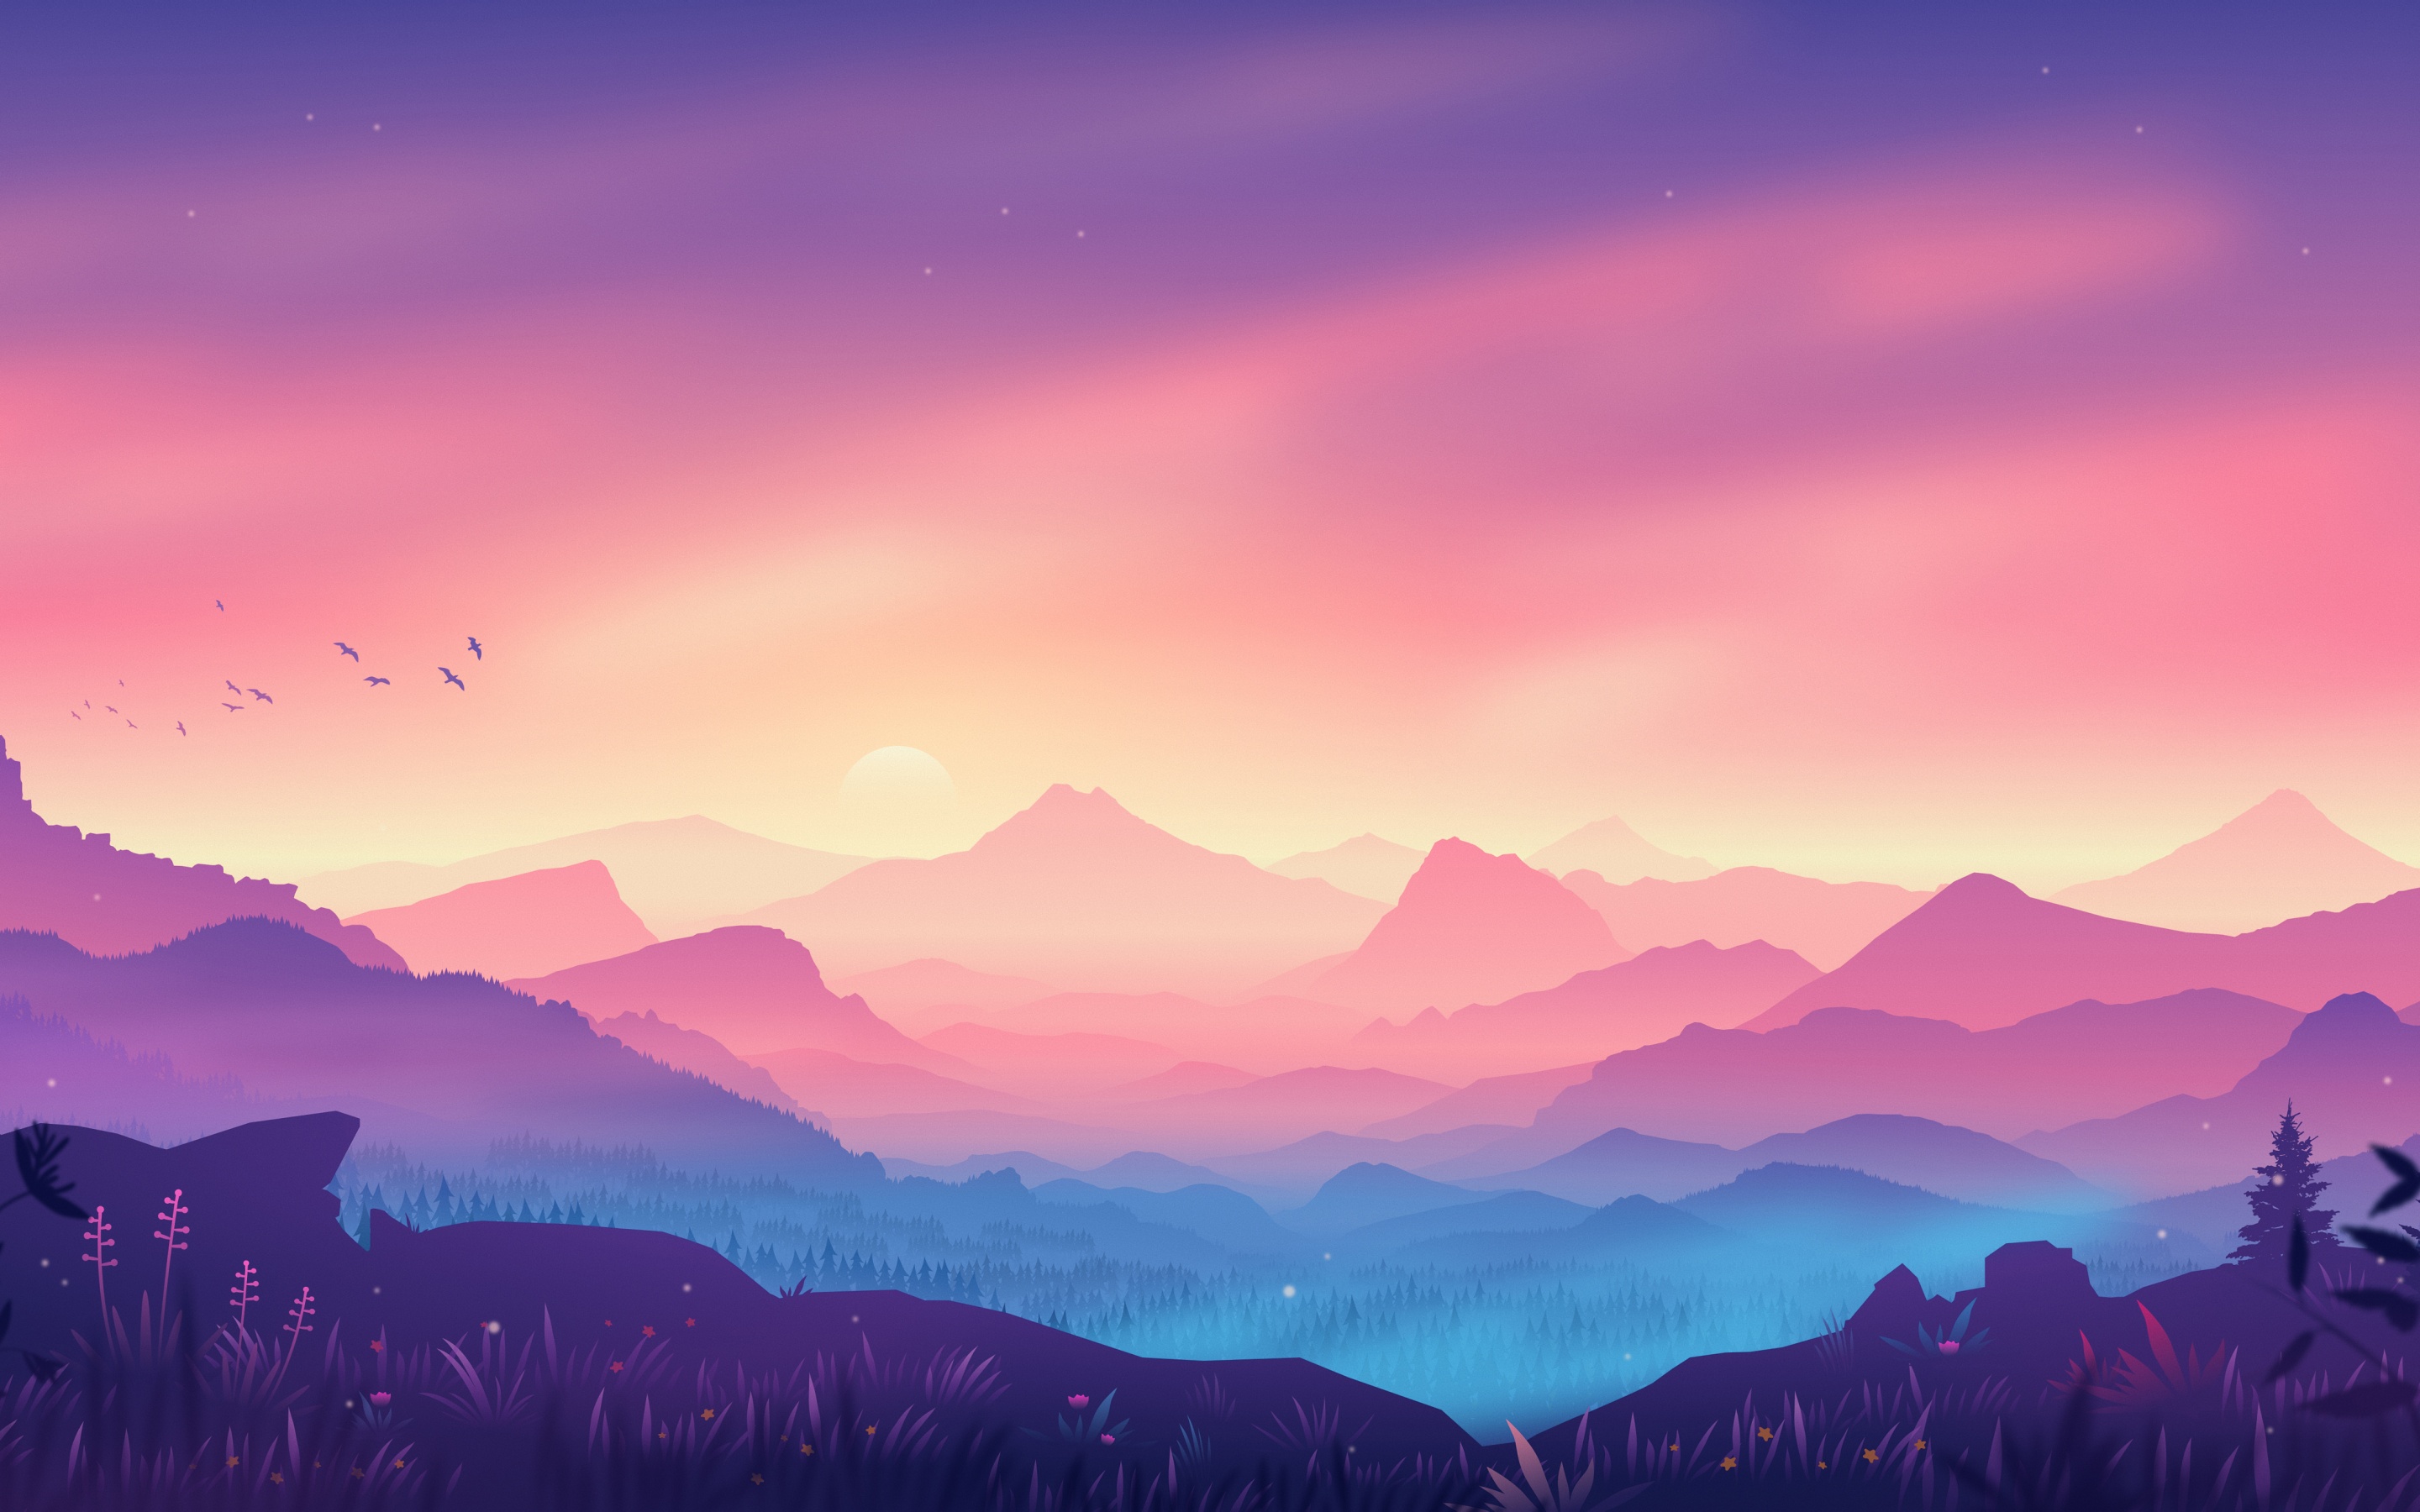 What is the title of this picture ? Valley 4K Wallpaper, Landscape, Aesthetic, Mountains, Gradient